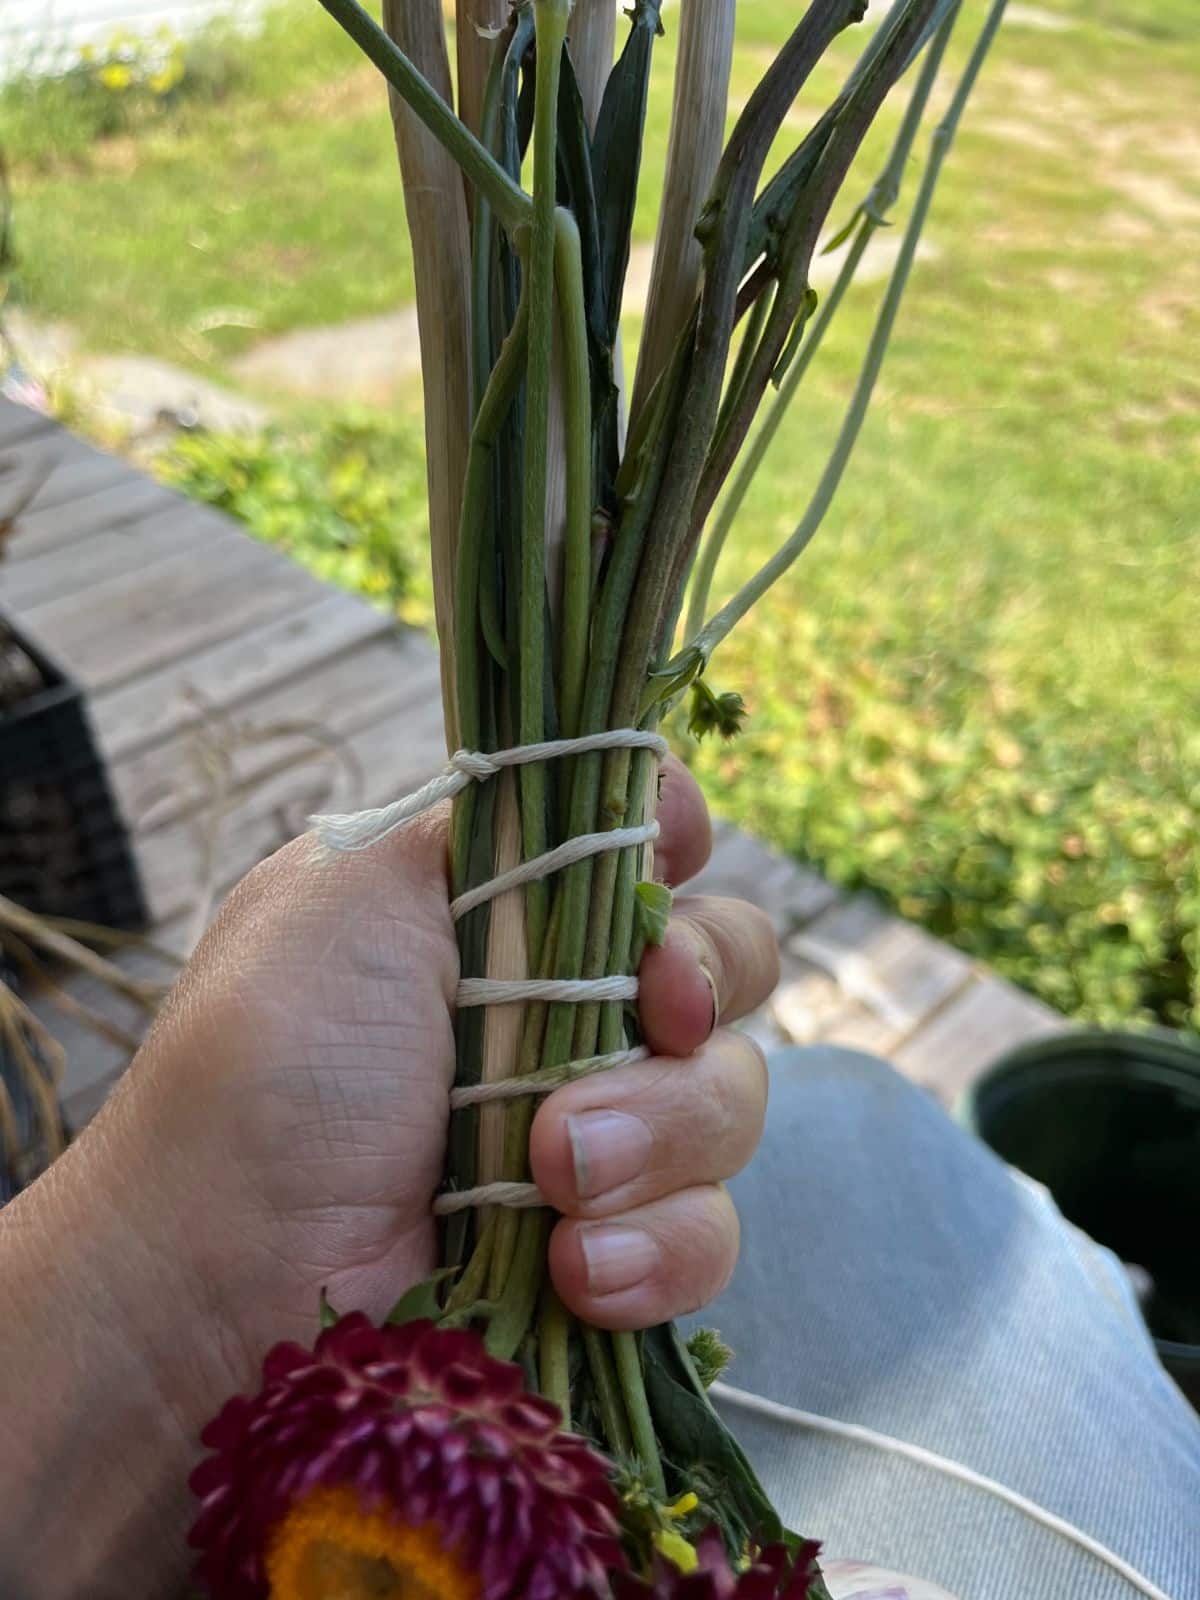 Wrapping the stems of the garlic and dried flowers with white twine